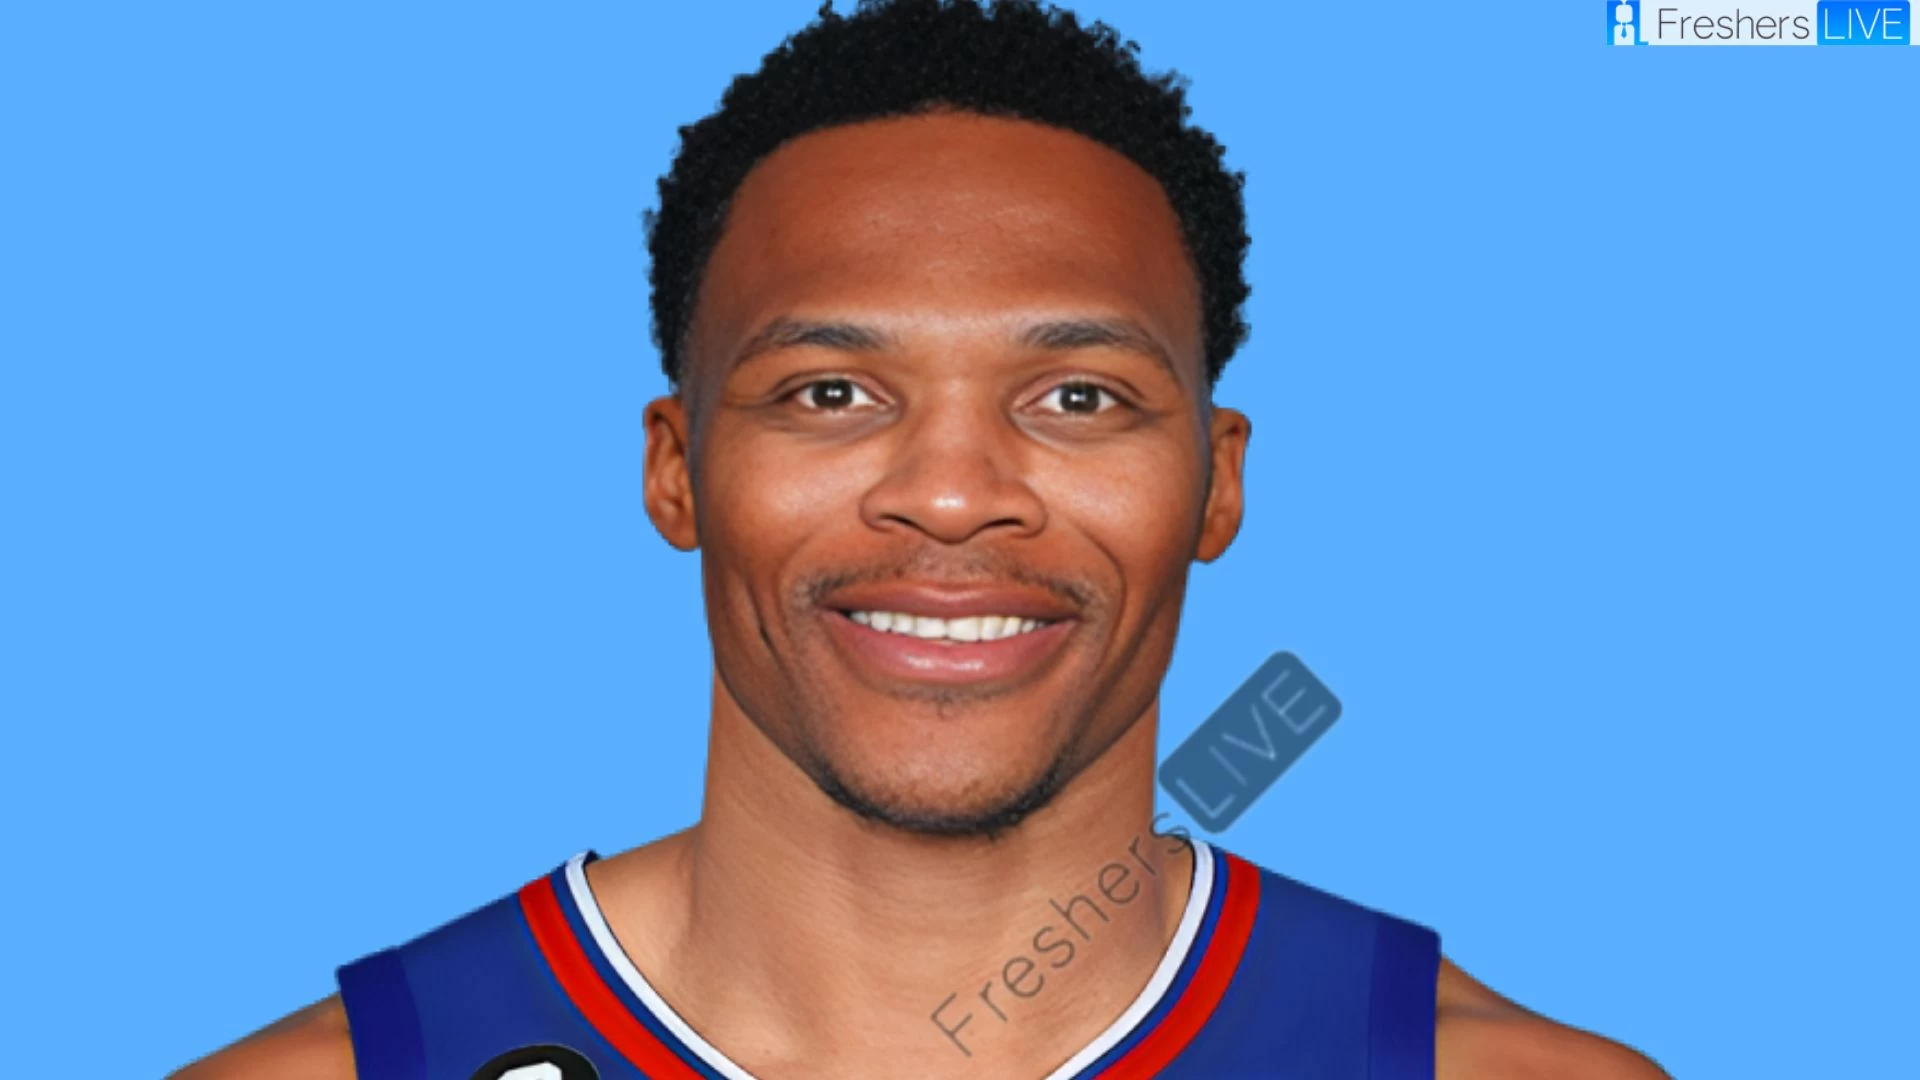 Russell Westbrook Religion What Religion is Russell Westbrook? Is Russell Westbrook a Christian?